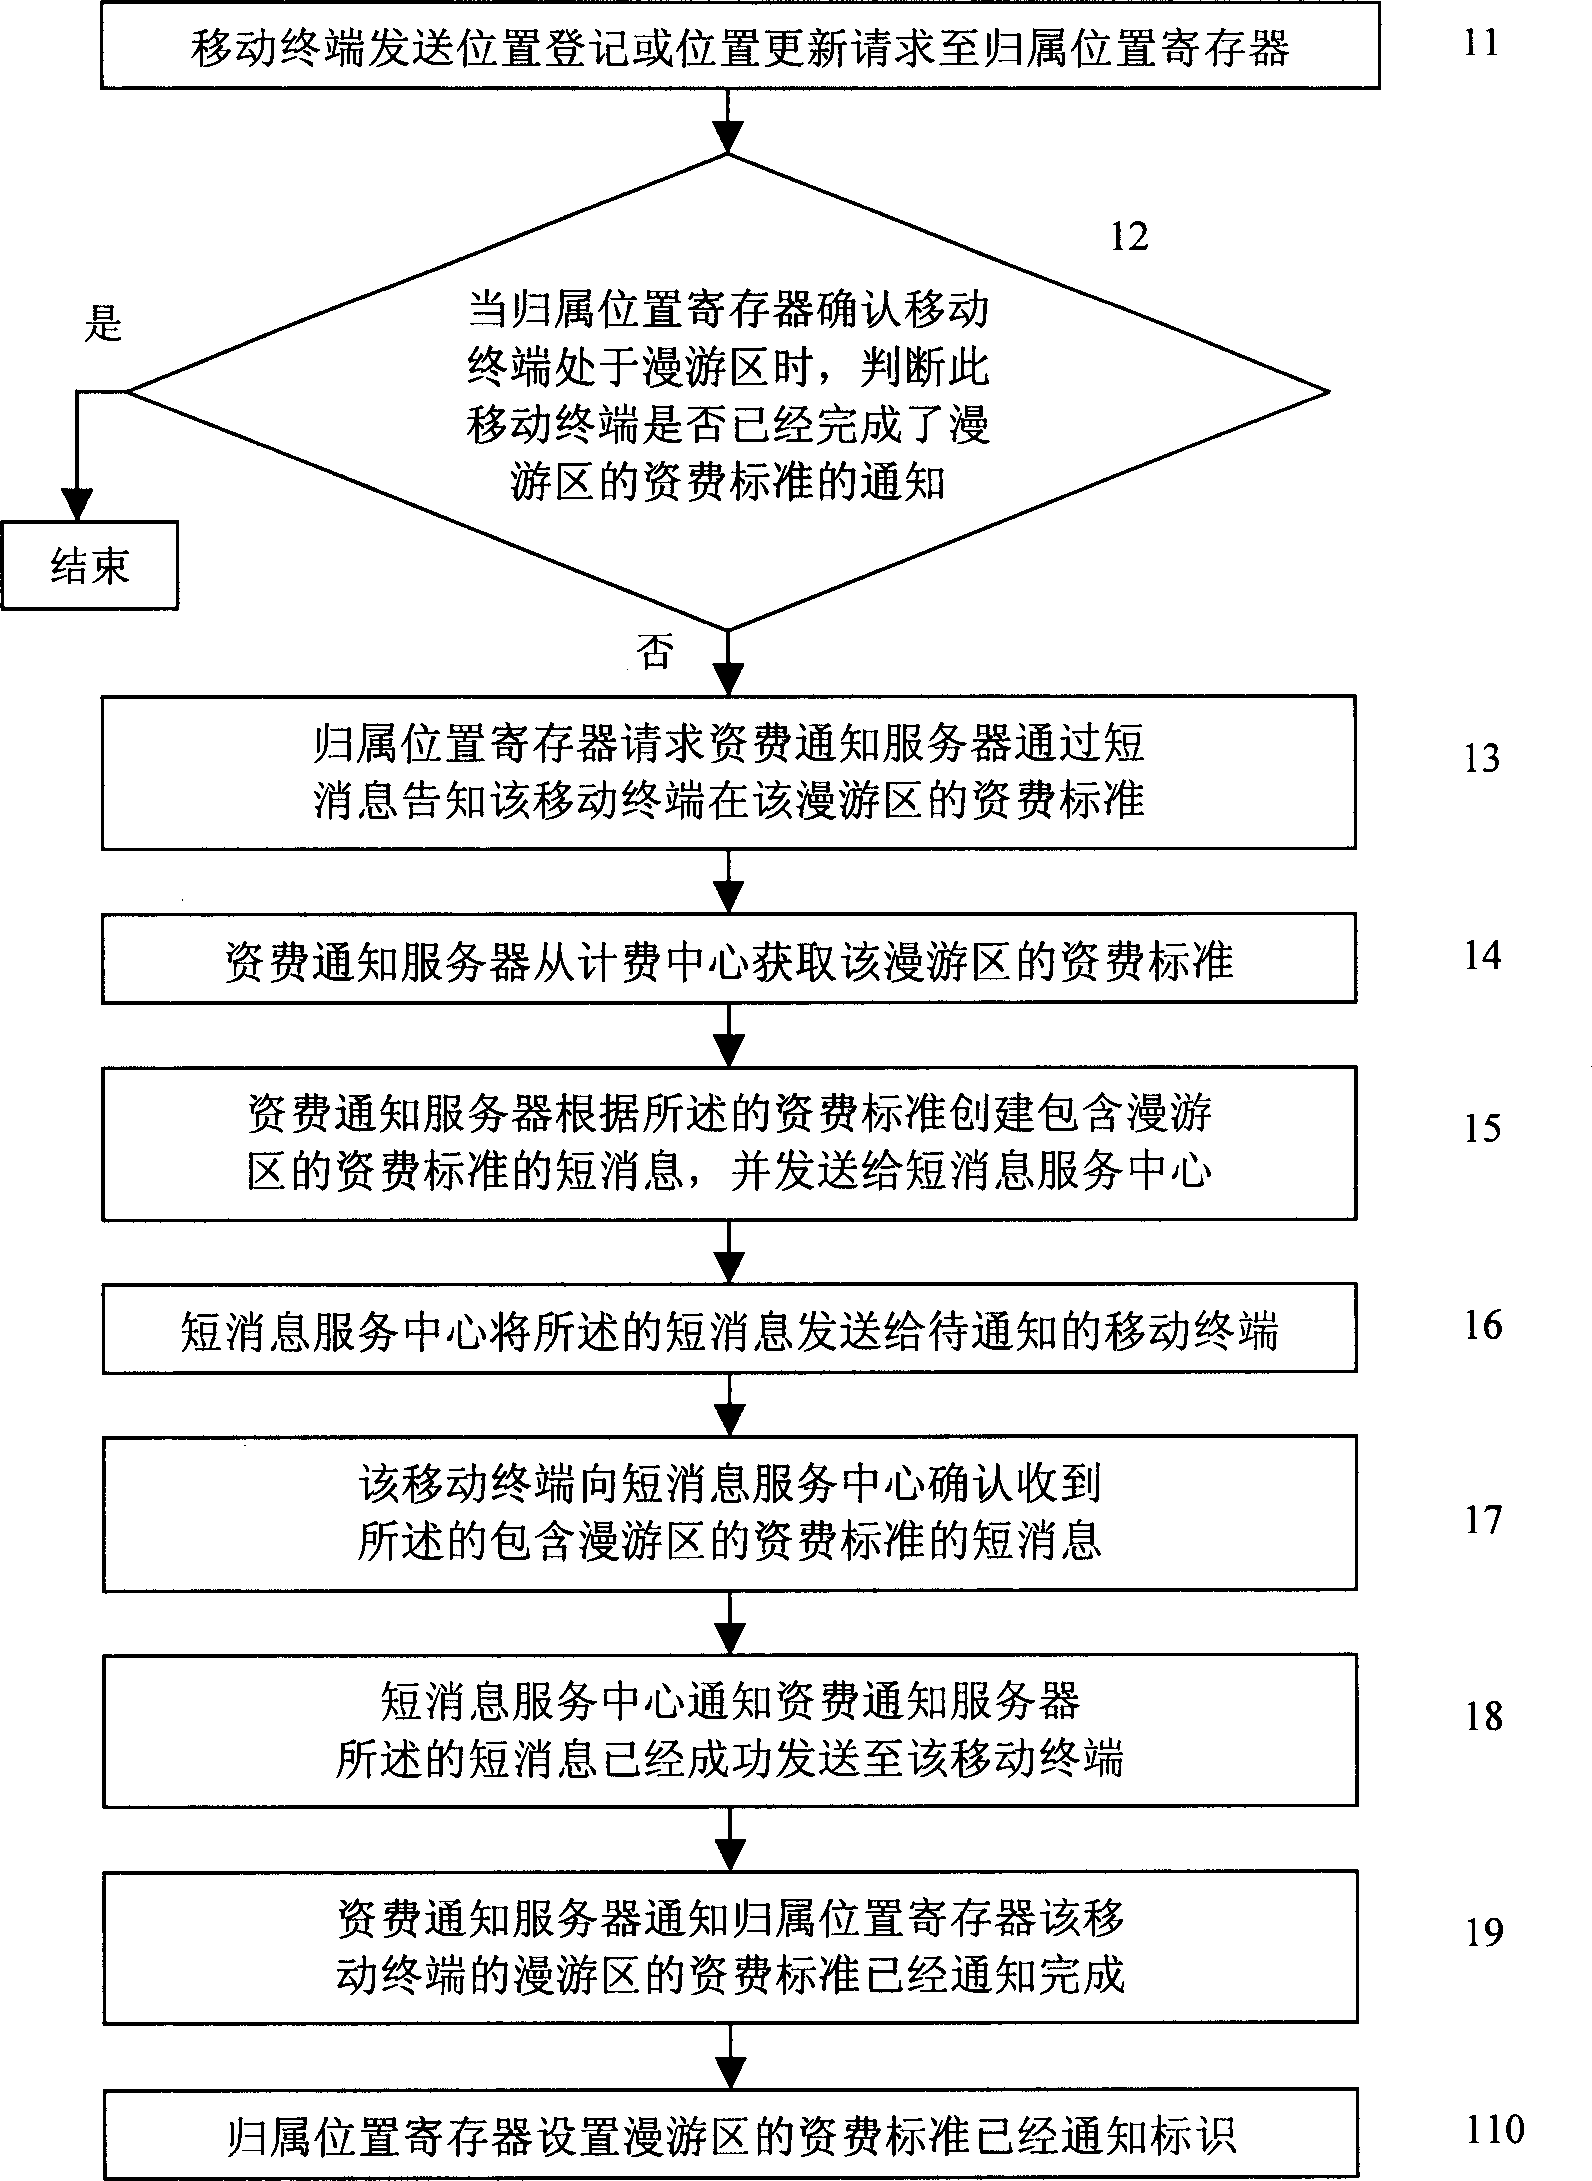 Expense ratio alteration informing method and system